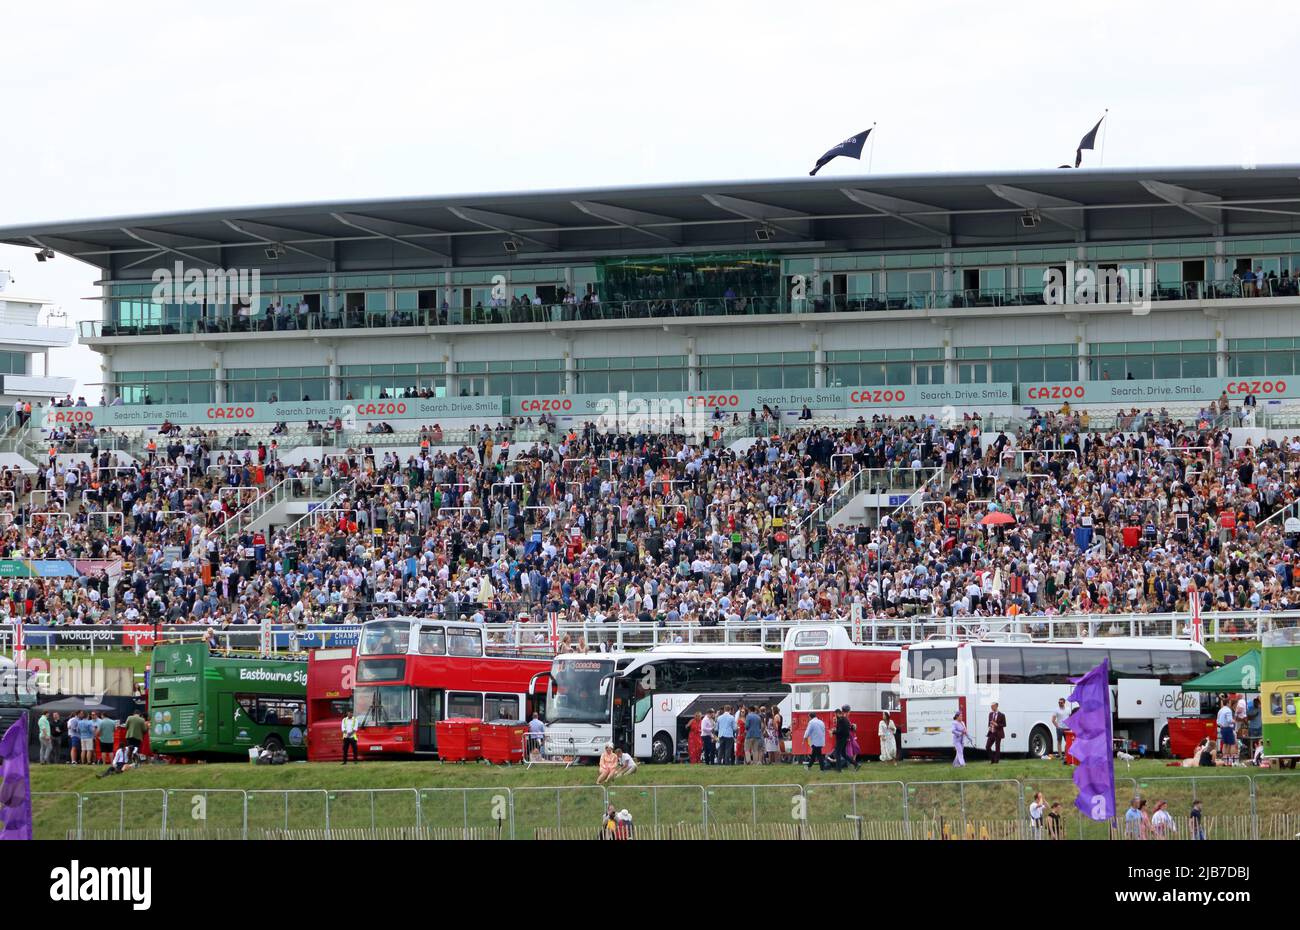 Epsom Downs, Surrey, England, UK. 3rd June, 2022. Huge crowds enjoying the racing festival at Epsom Downs in Surrey, part of the Platinum Jubilee weekend celebrations for the 70 year reign of the British monarch Queen Elizabeth II. Credit: Julia Gavin/Alamy Live News Stock Photo